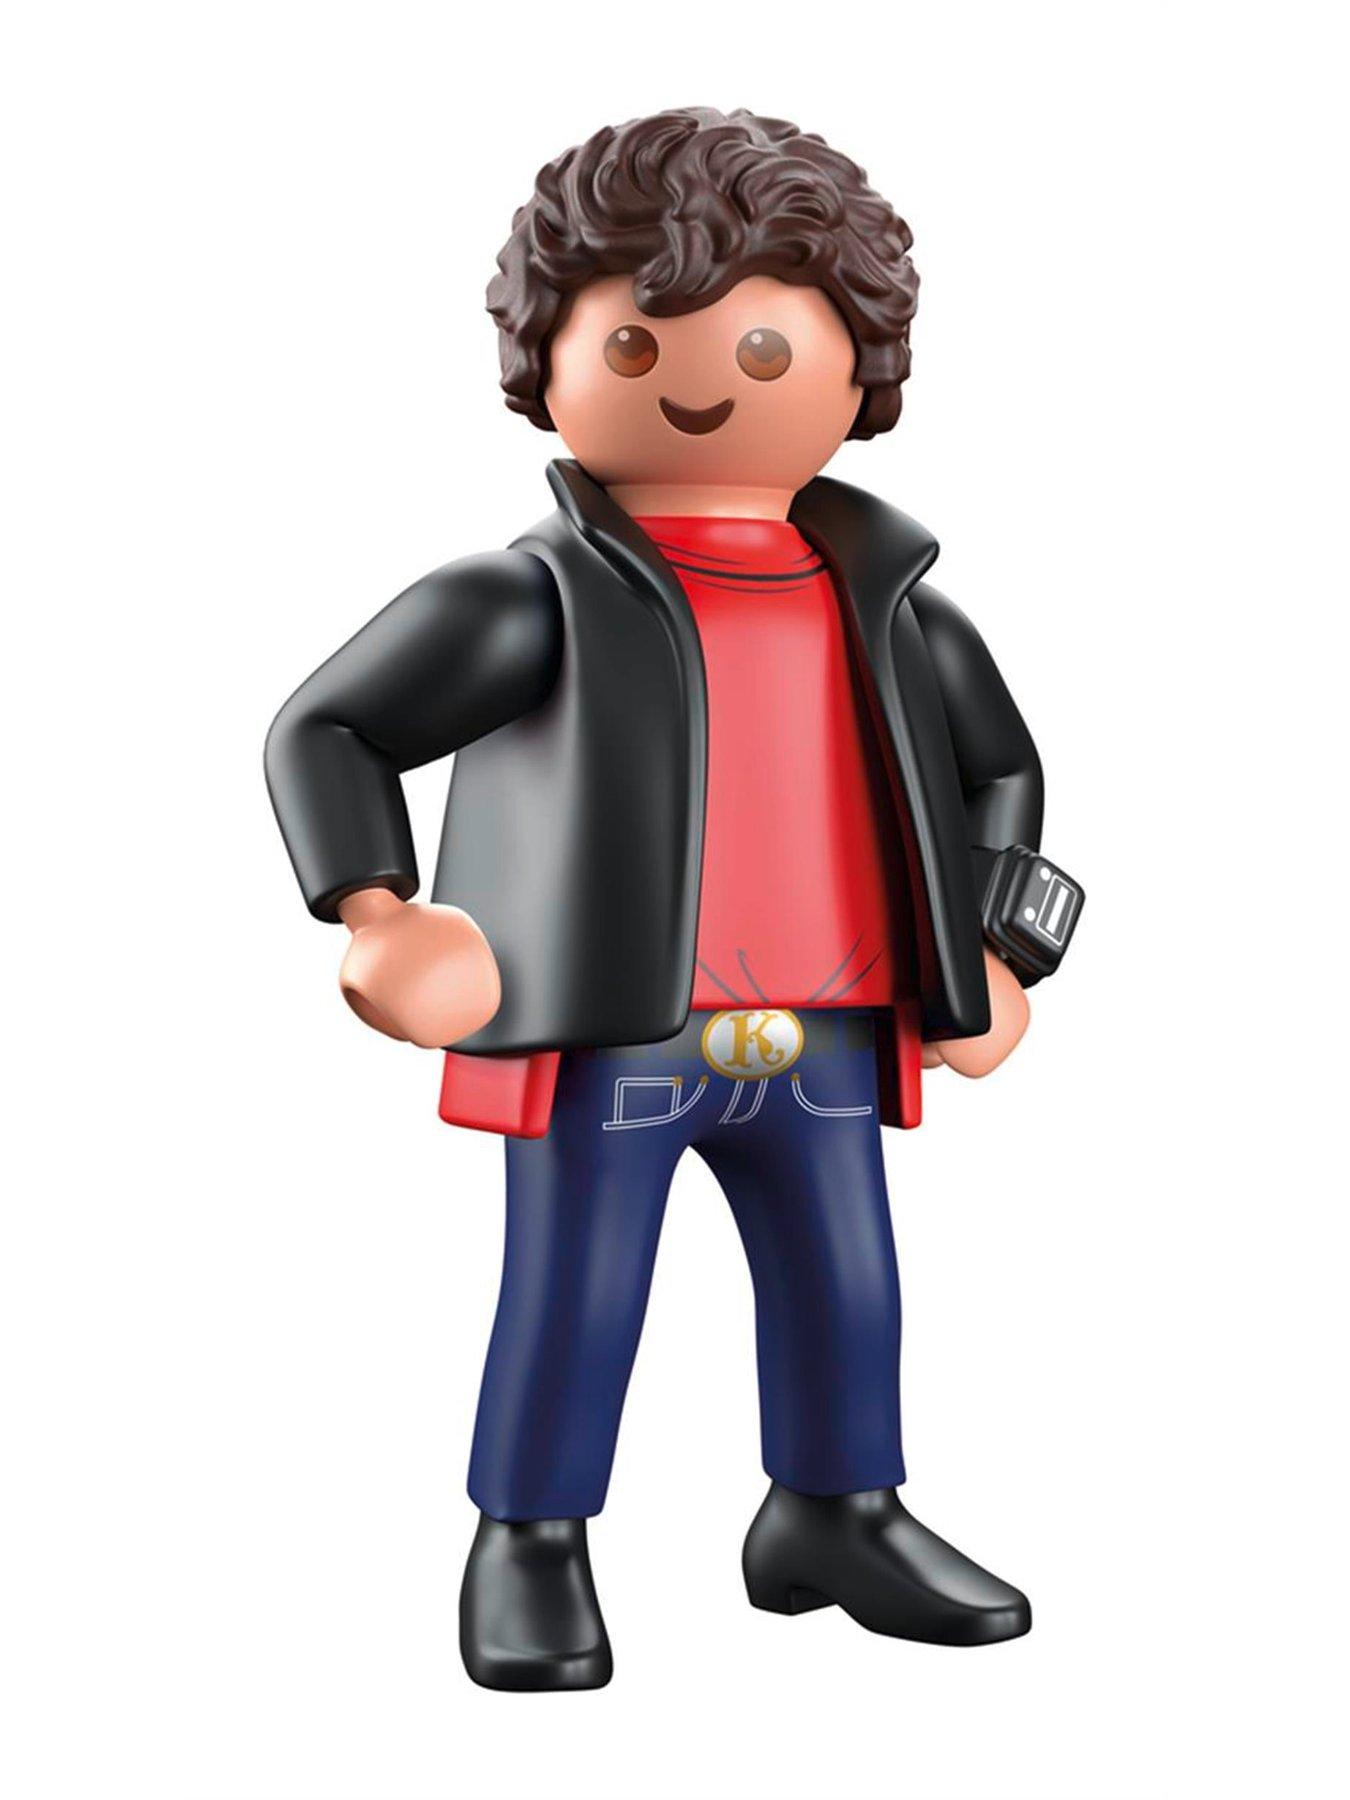 Playmobil 70924 Knight Rider - K.I.T.T. with original Lights and